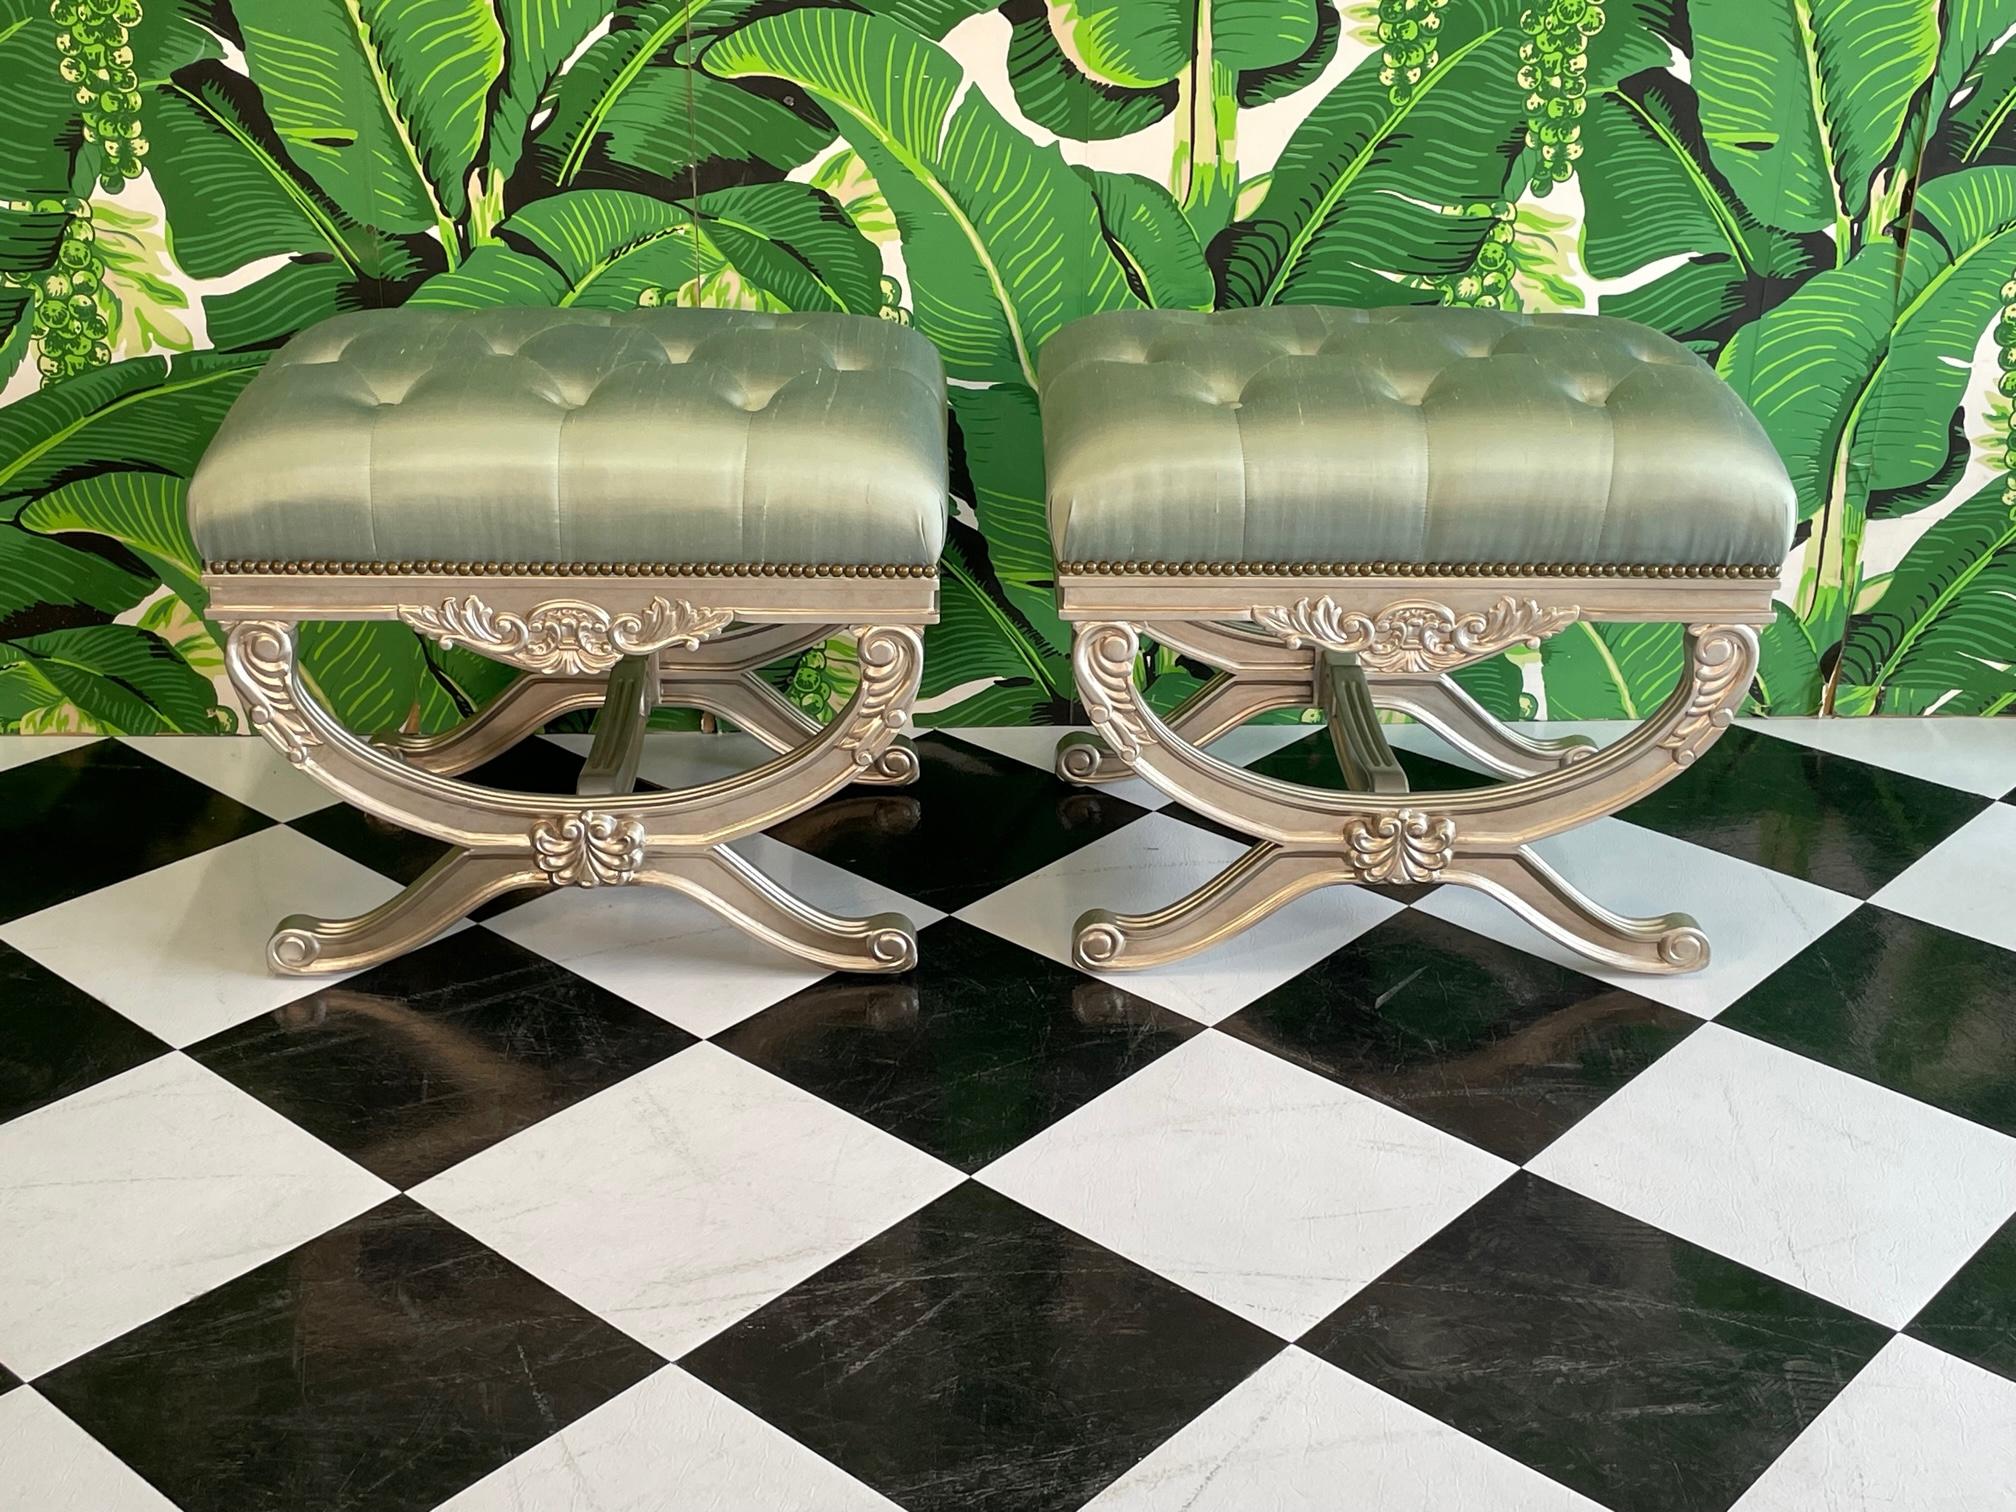 Pair of Hollywood Regency footstools in the style of Dorothy Draper feature a solid wood frame and tufted upholstery. Good condition with minor imperfections consistent with age, see photos for condition details.
For a shipping quote to your exact